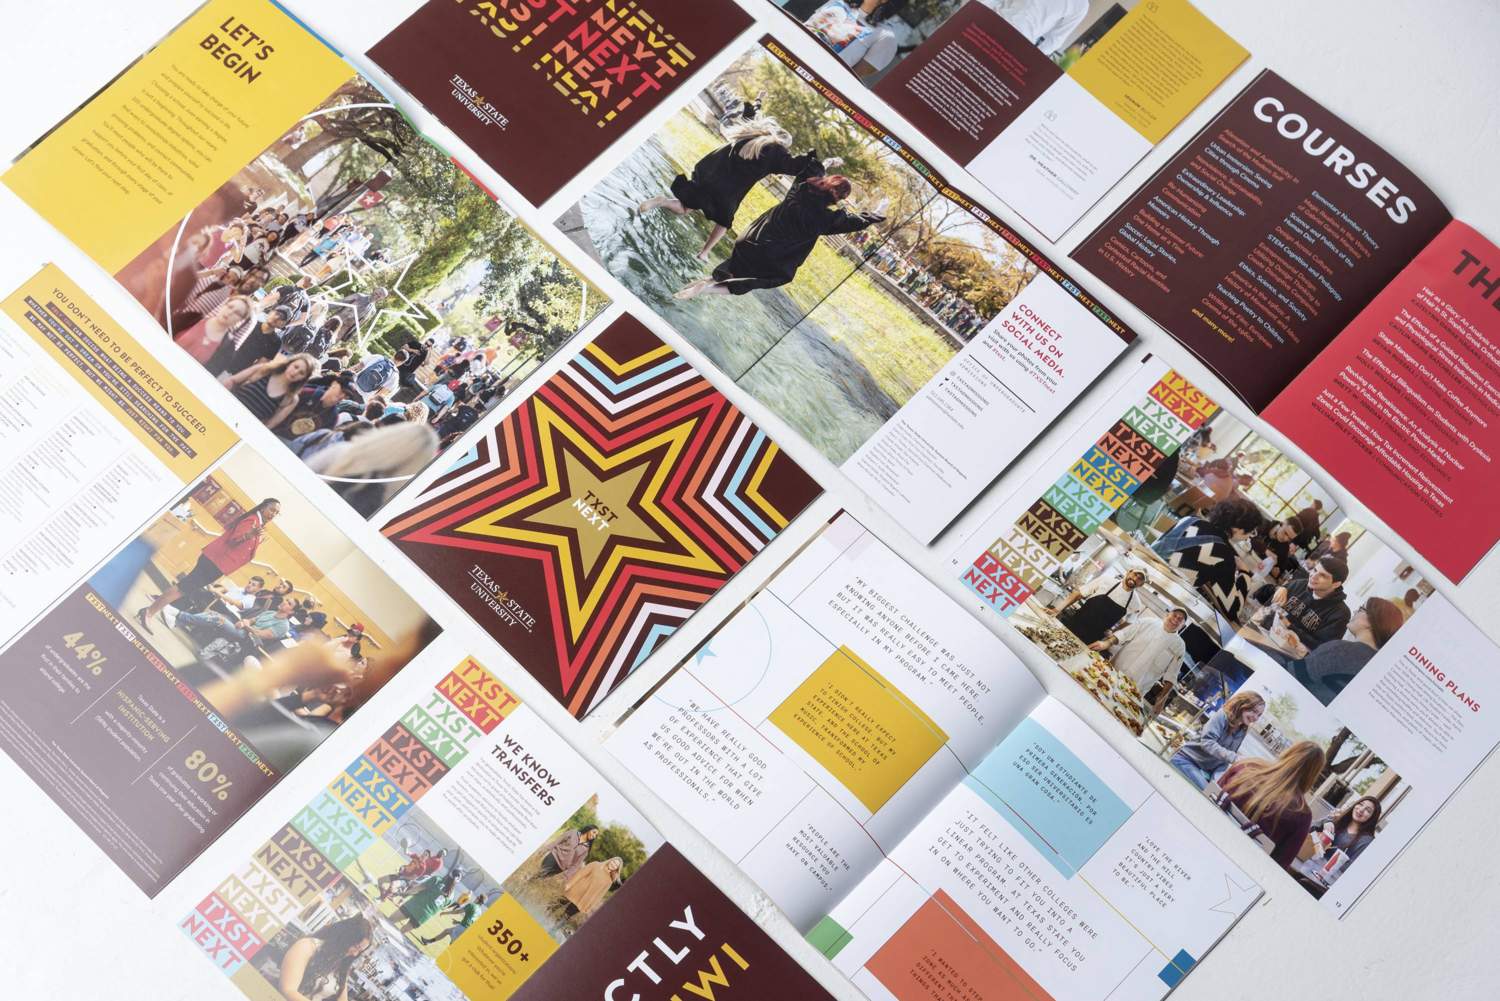 The Undergraduate Admissions print stream is laid out together, open to spreads that show off vibrant photography and bright splashes of color.